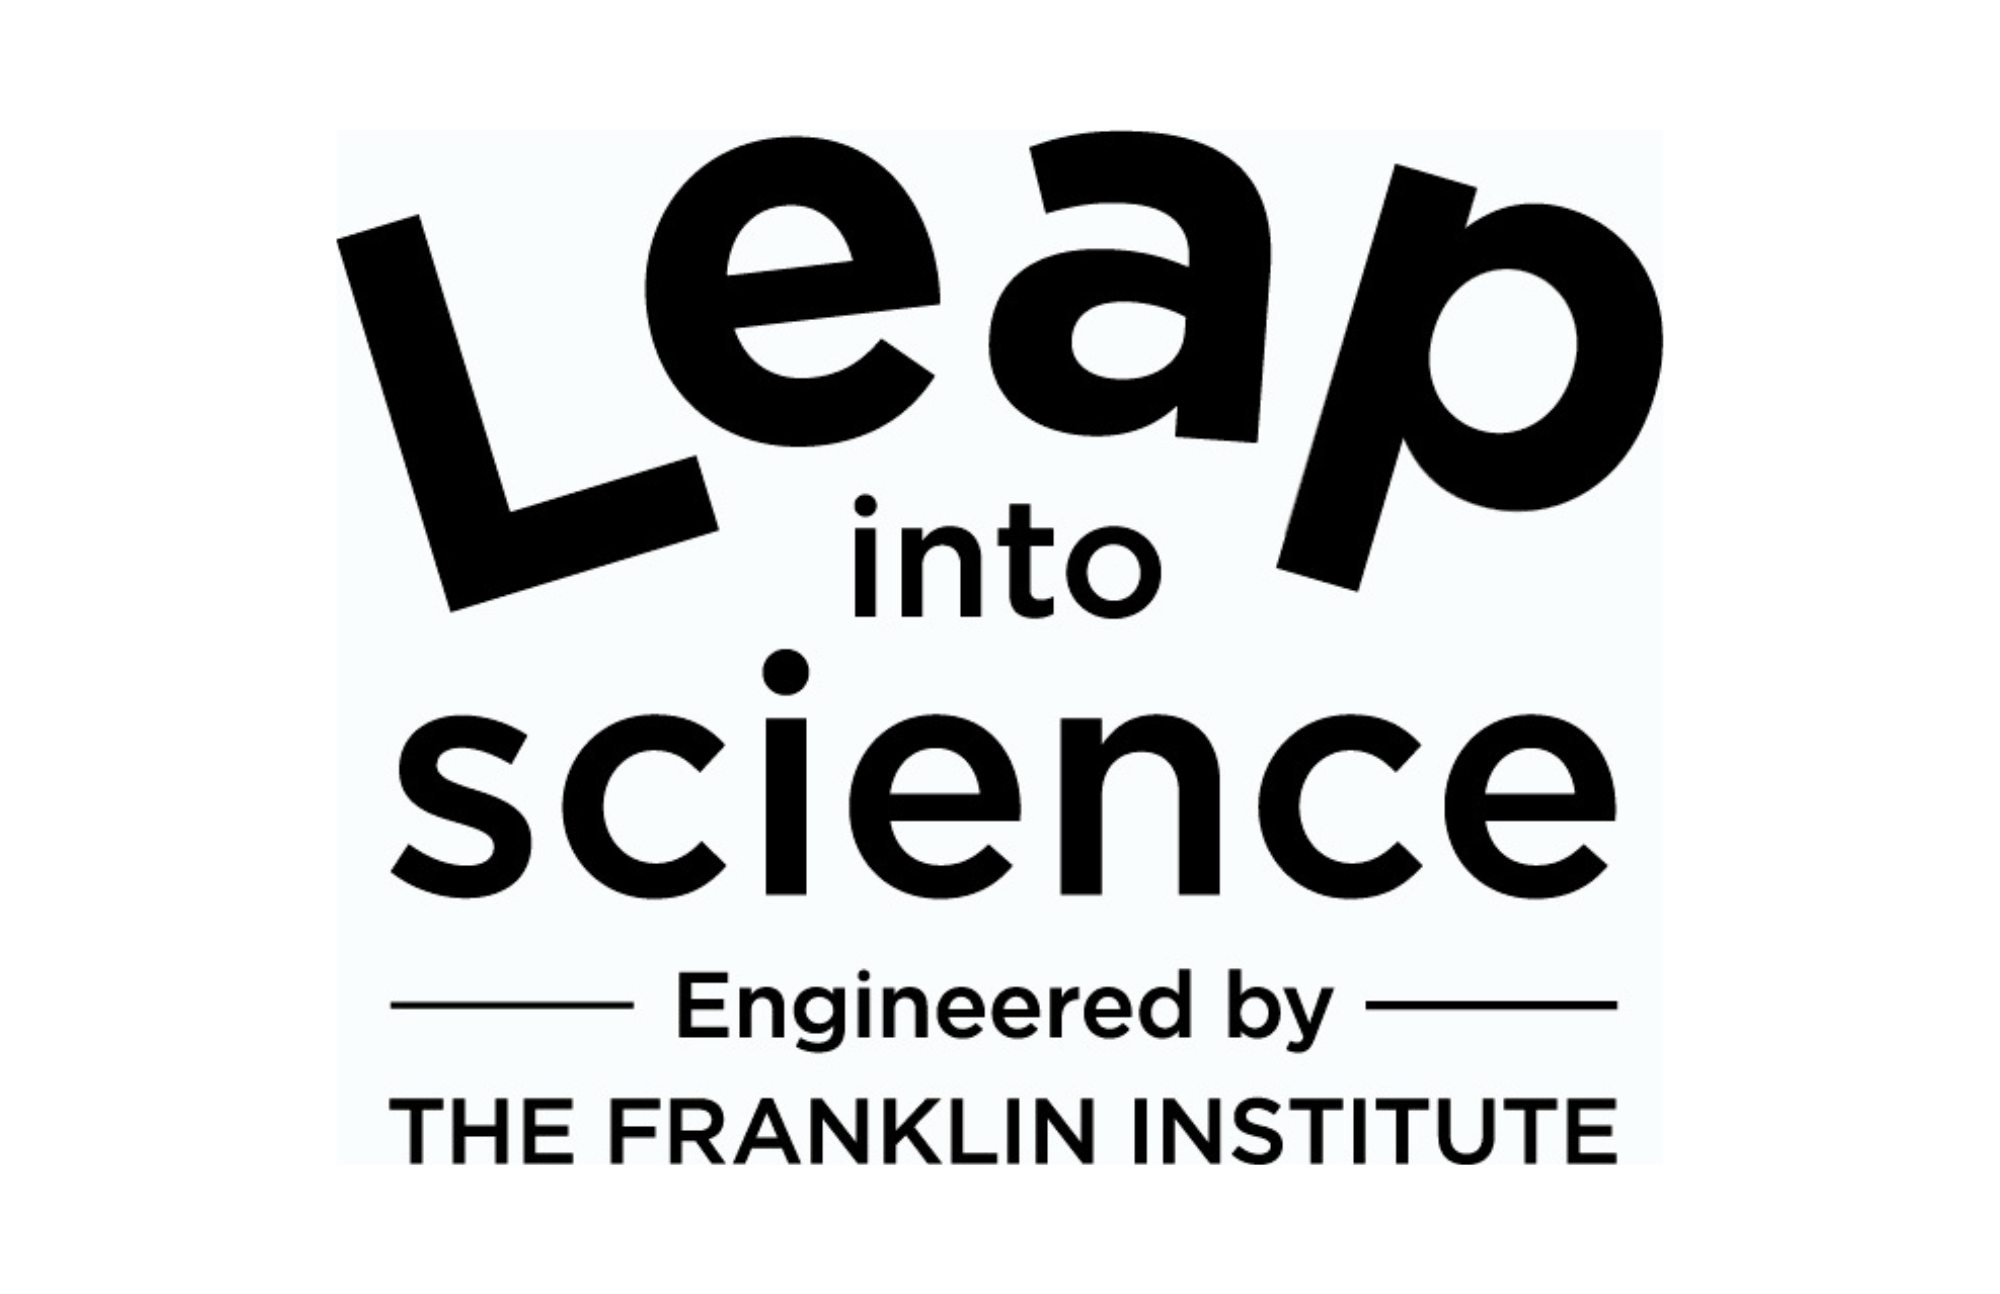 Leap into Science, engineered by The Franklin Institute